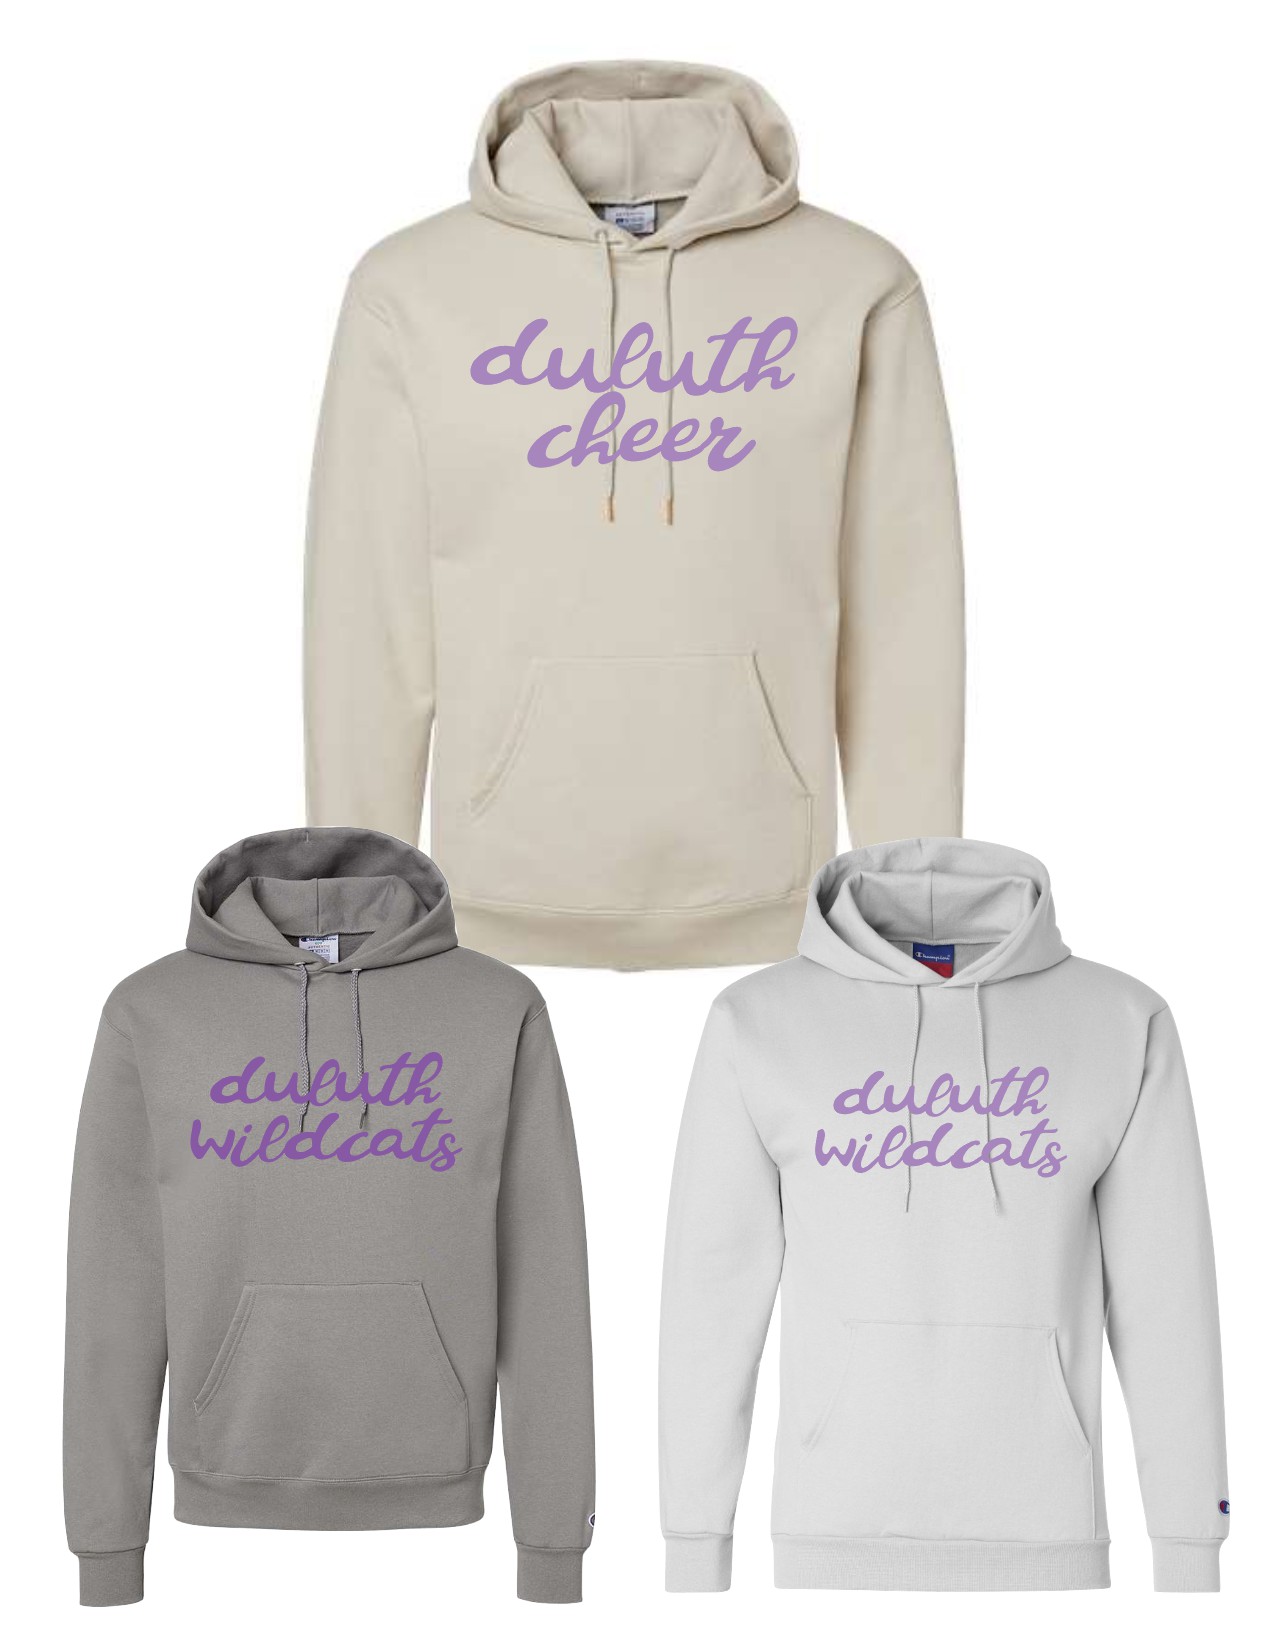 'duluth cursive' - Champion Hoodie - Wildcats or Cheer - EM Local